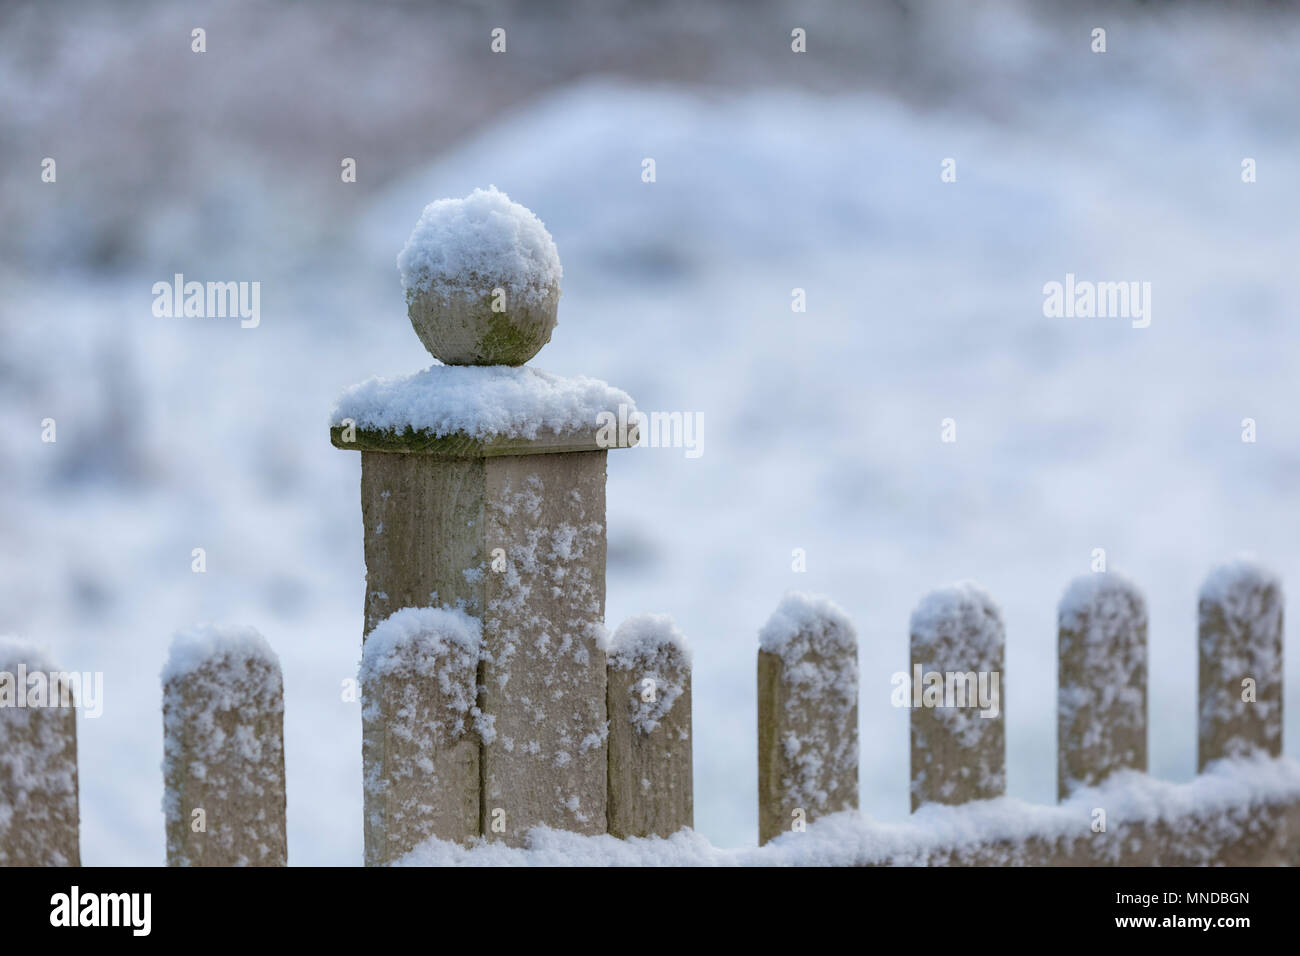 Snow capped wooden fence with a ball finial. Stock Photo